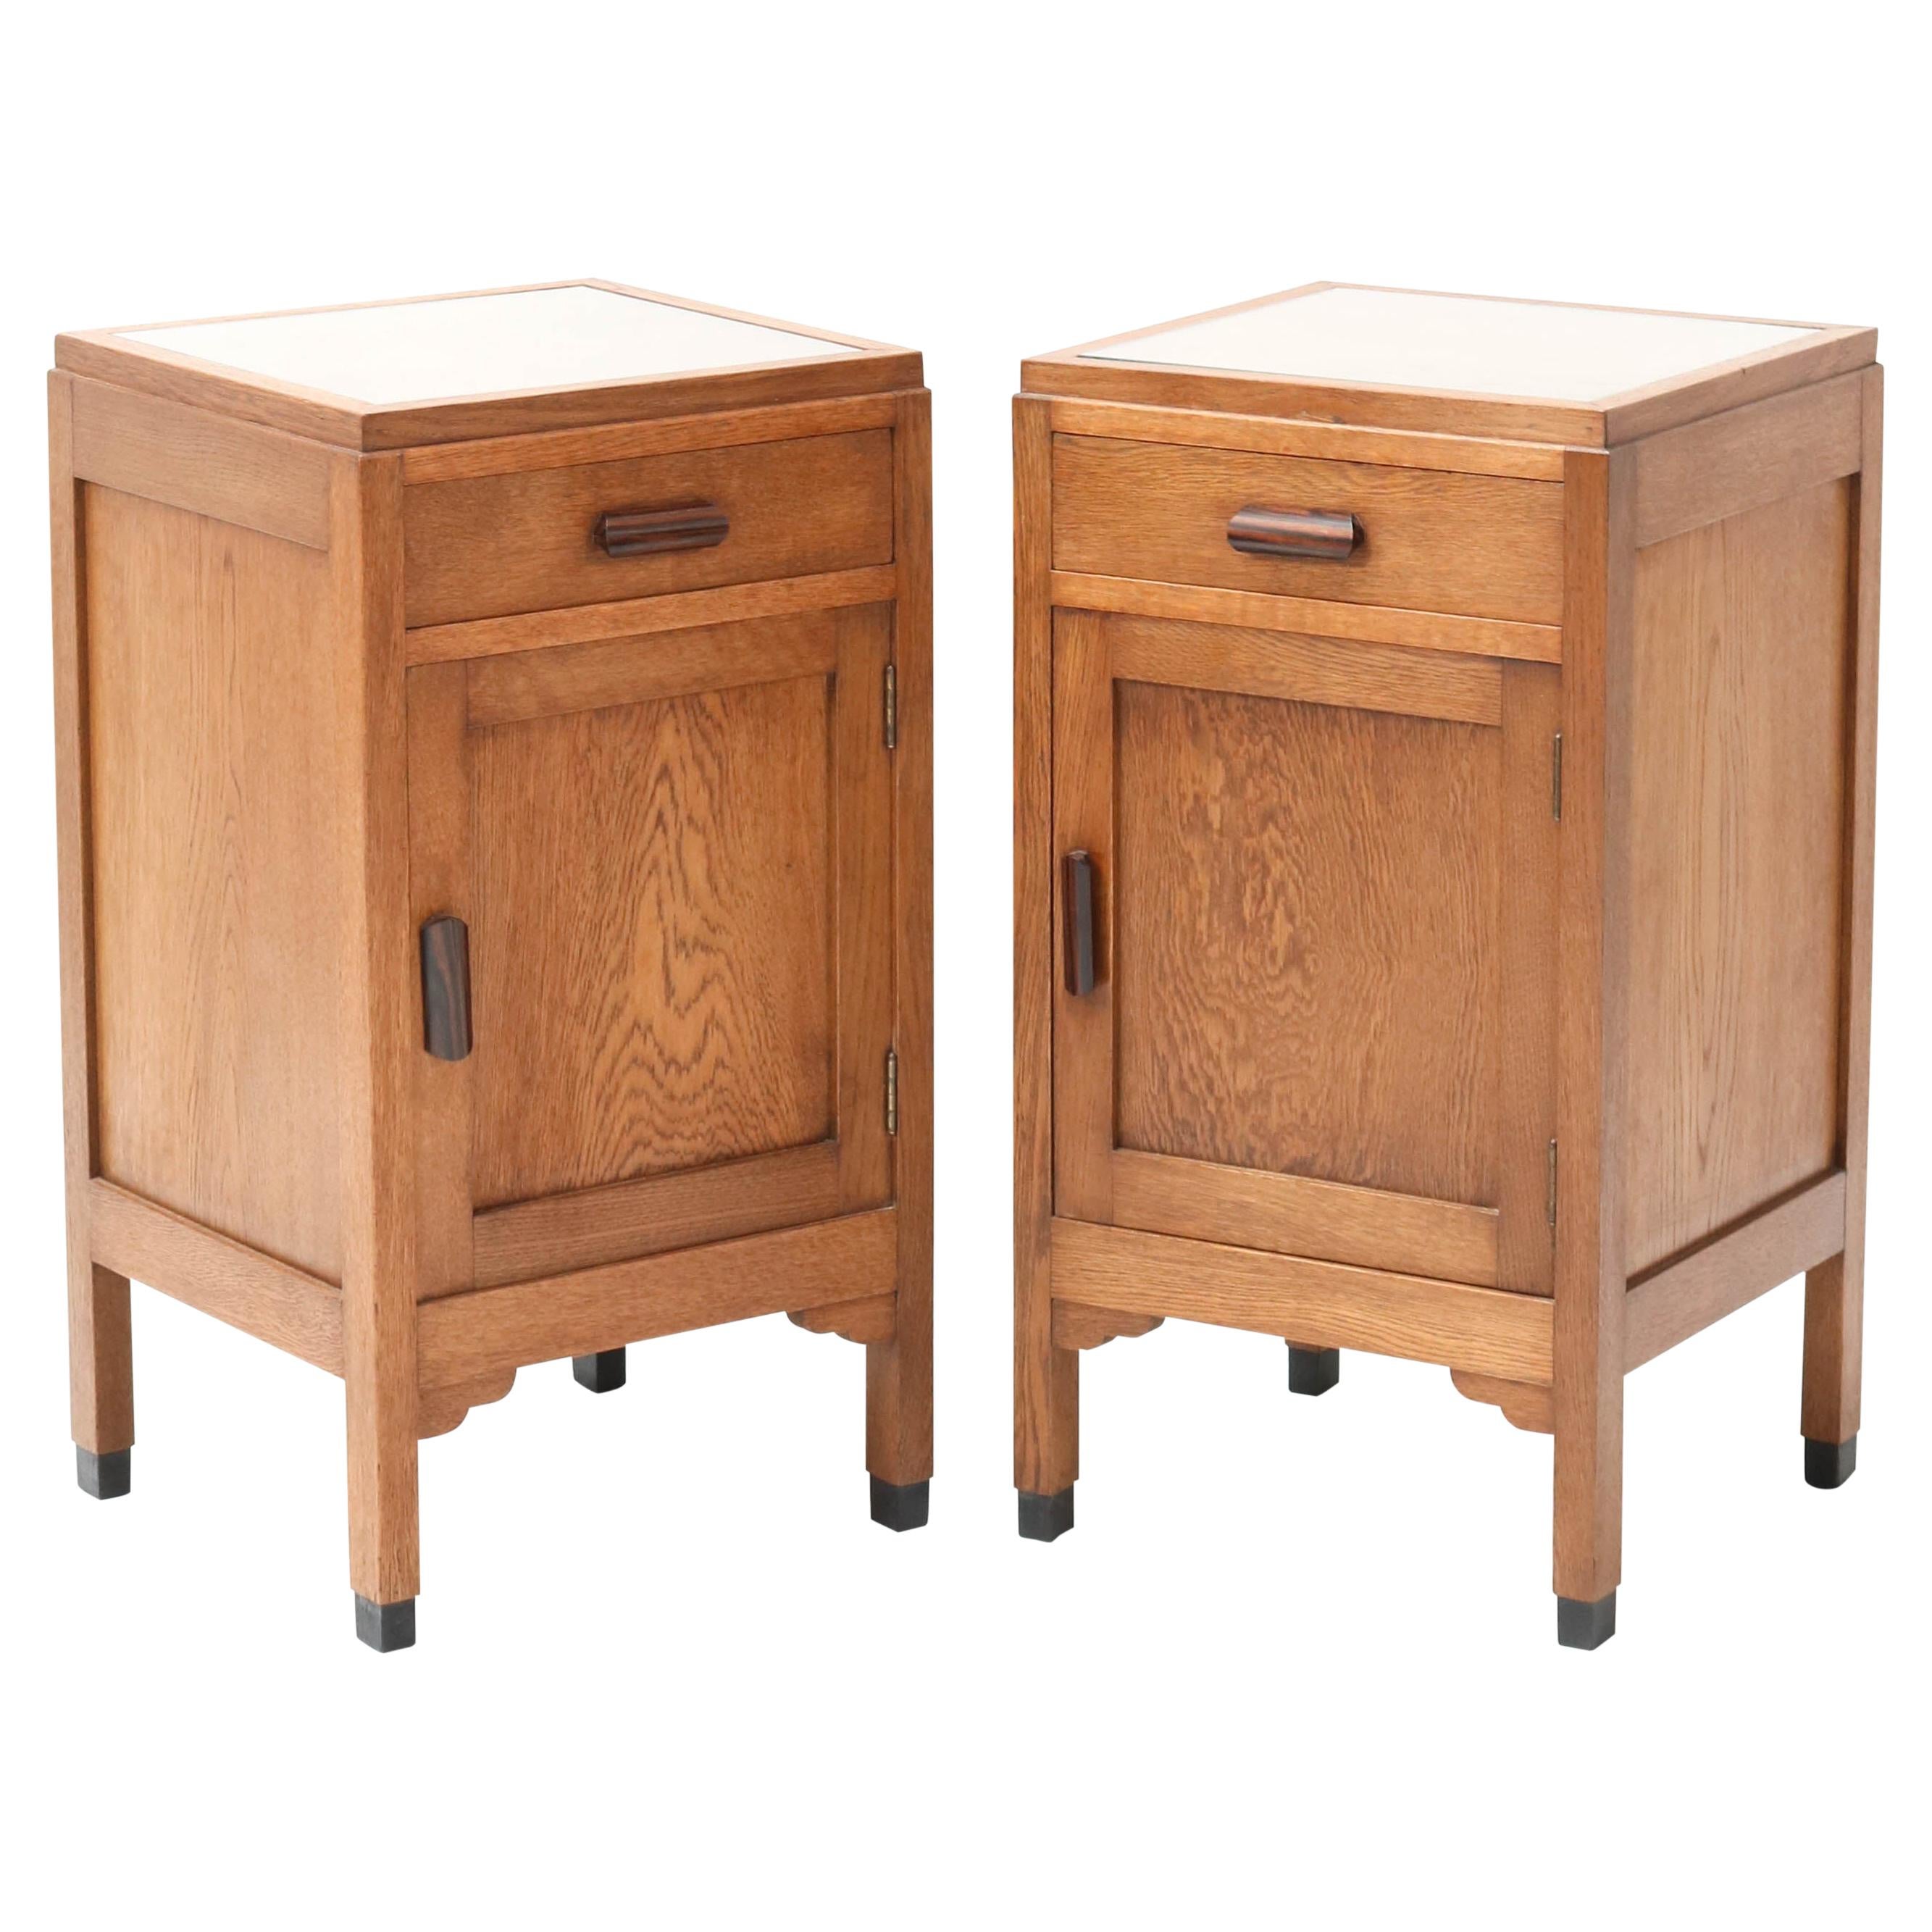 Two Oak Art Deco Amsterdam School Nightstand or Bedside Tables by Fa. Drilling